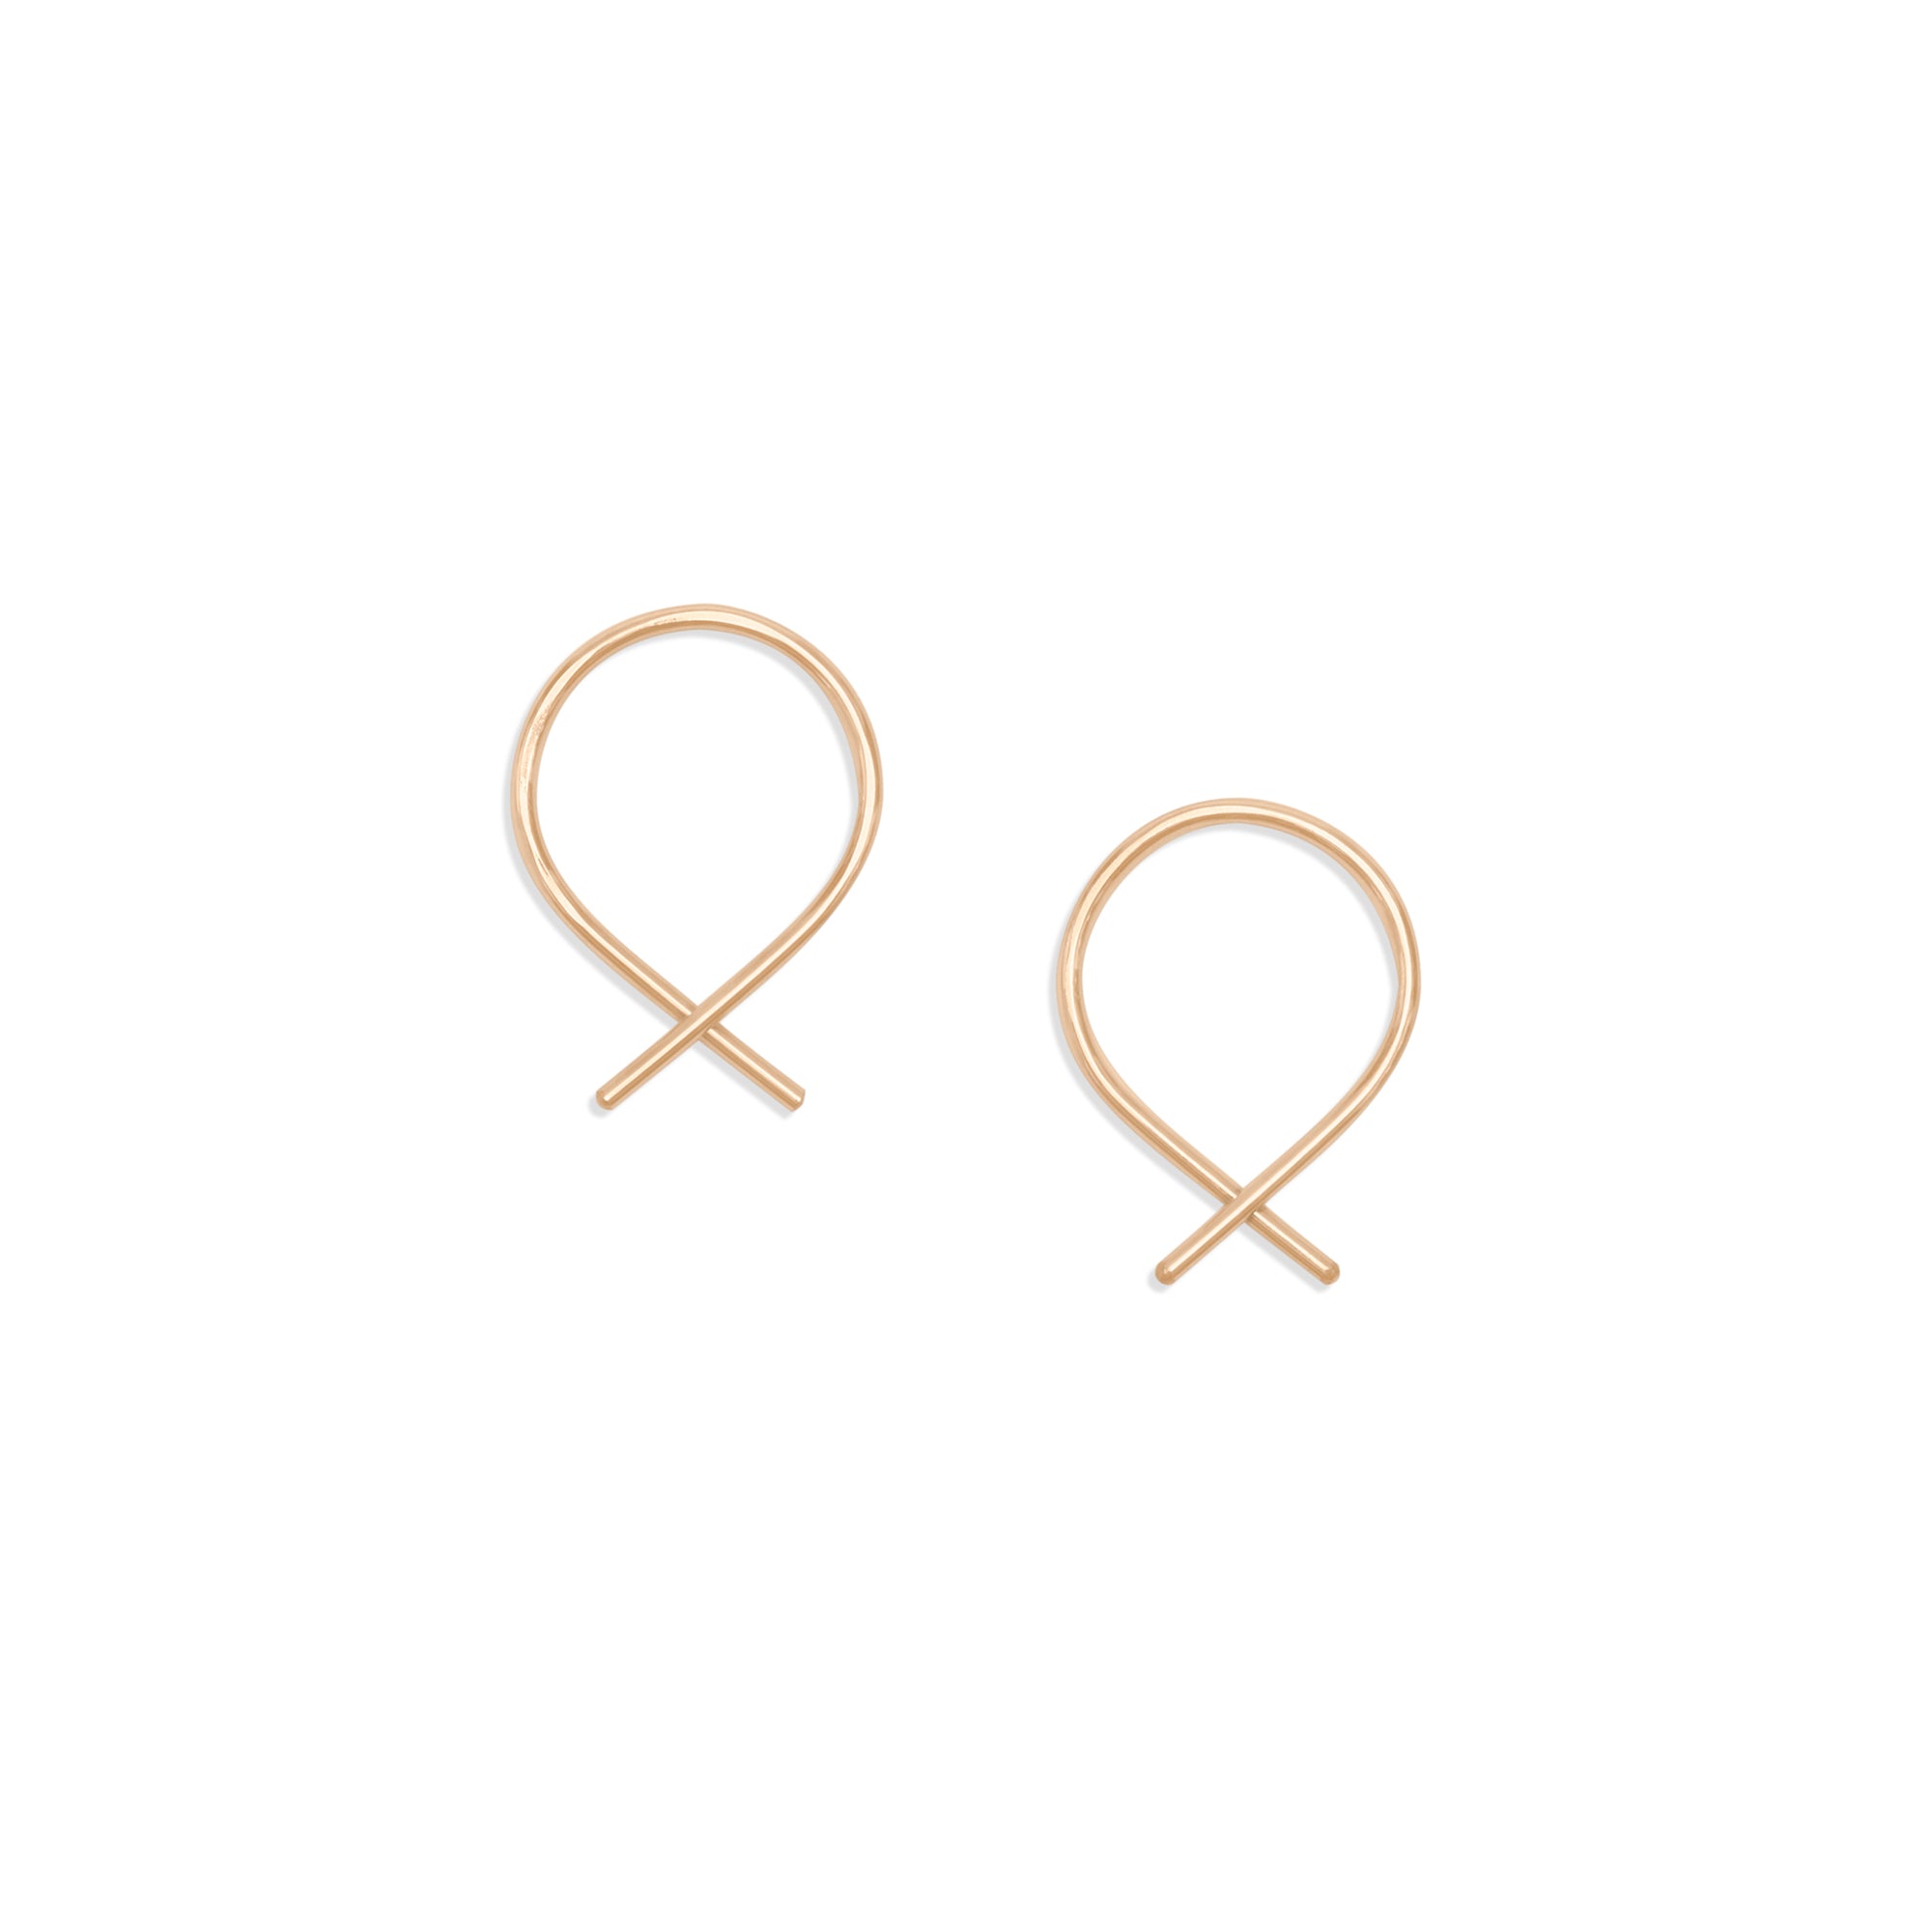 The Fish Earrings are delicate threader earrings feature 14K gold-fill or silver wire shaped into a continuous, open hoop 